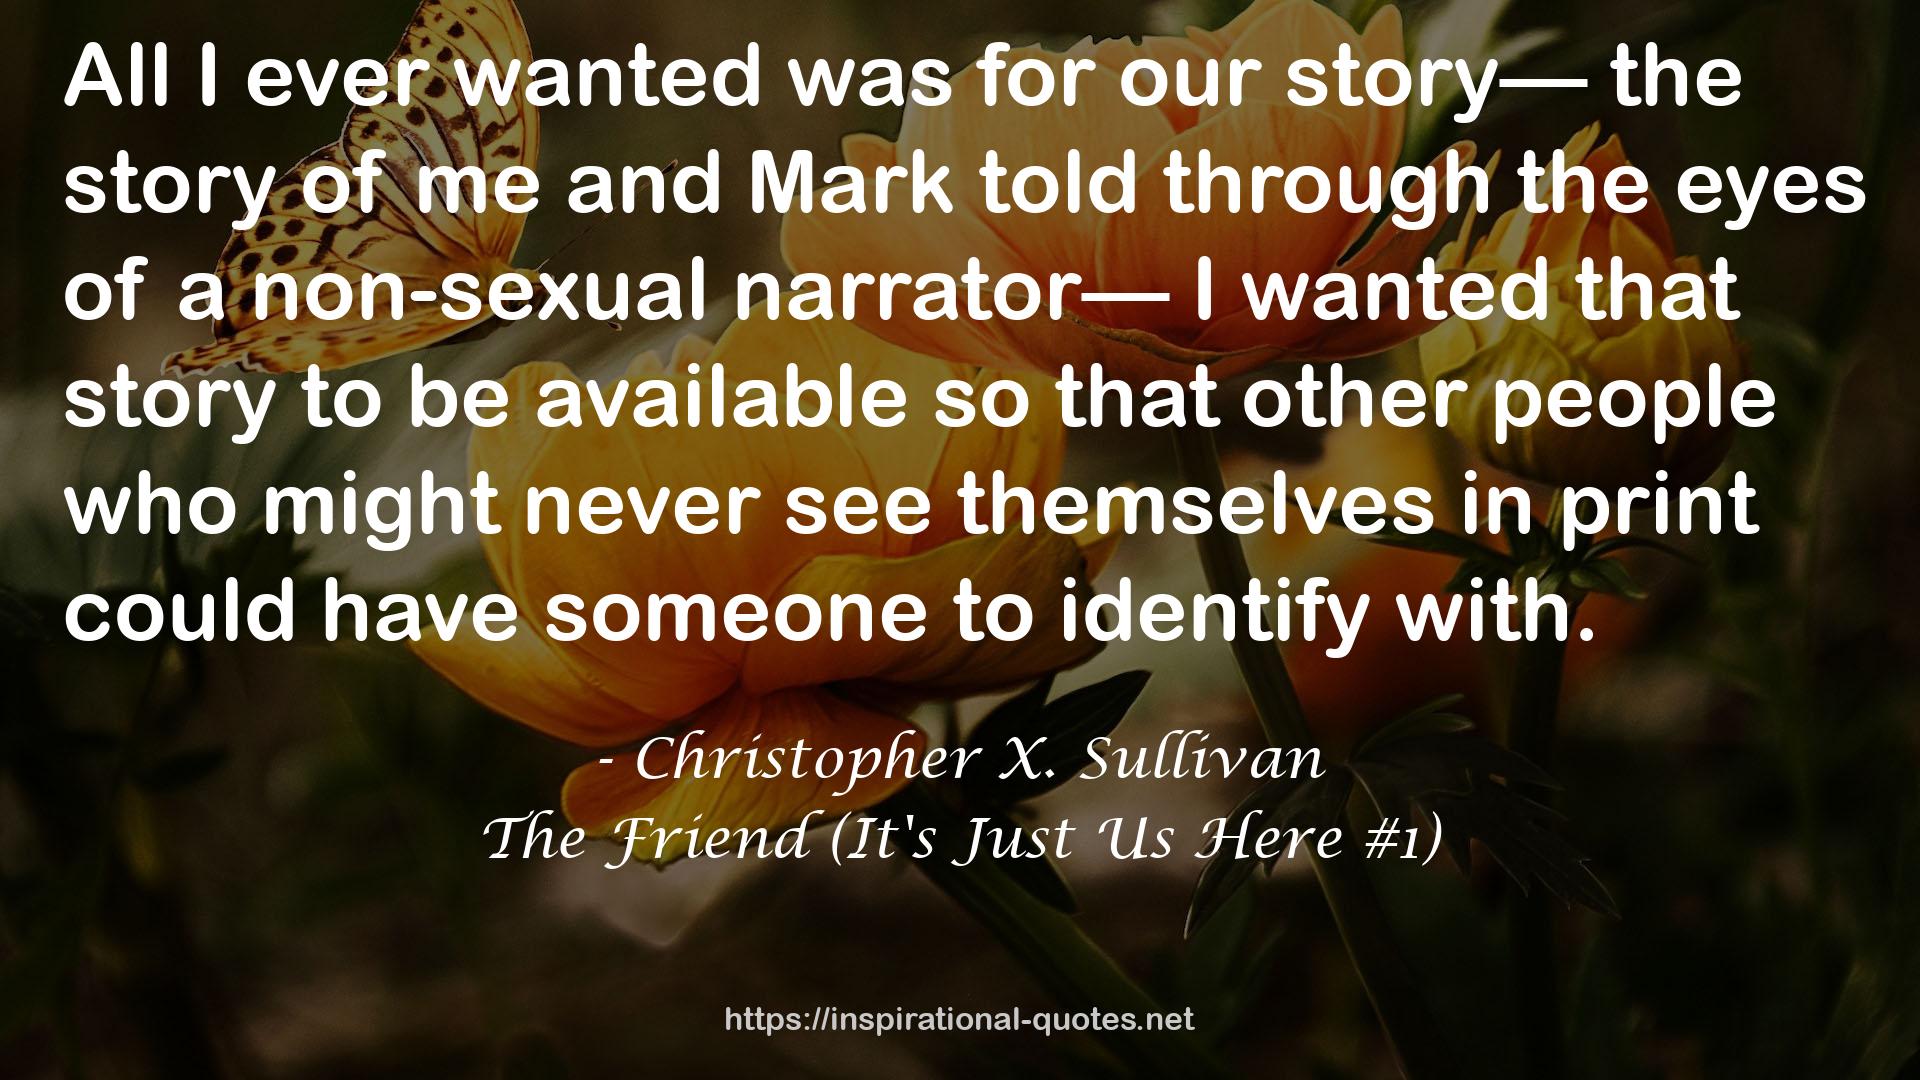 The Friend (It's Just Us Here #1) QUOTES